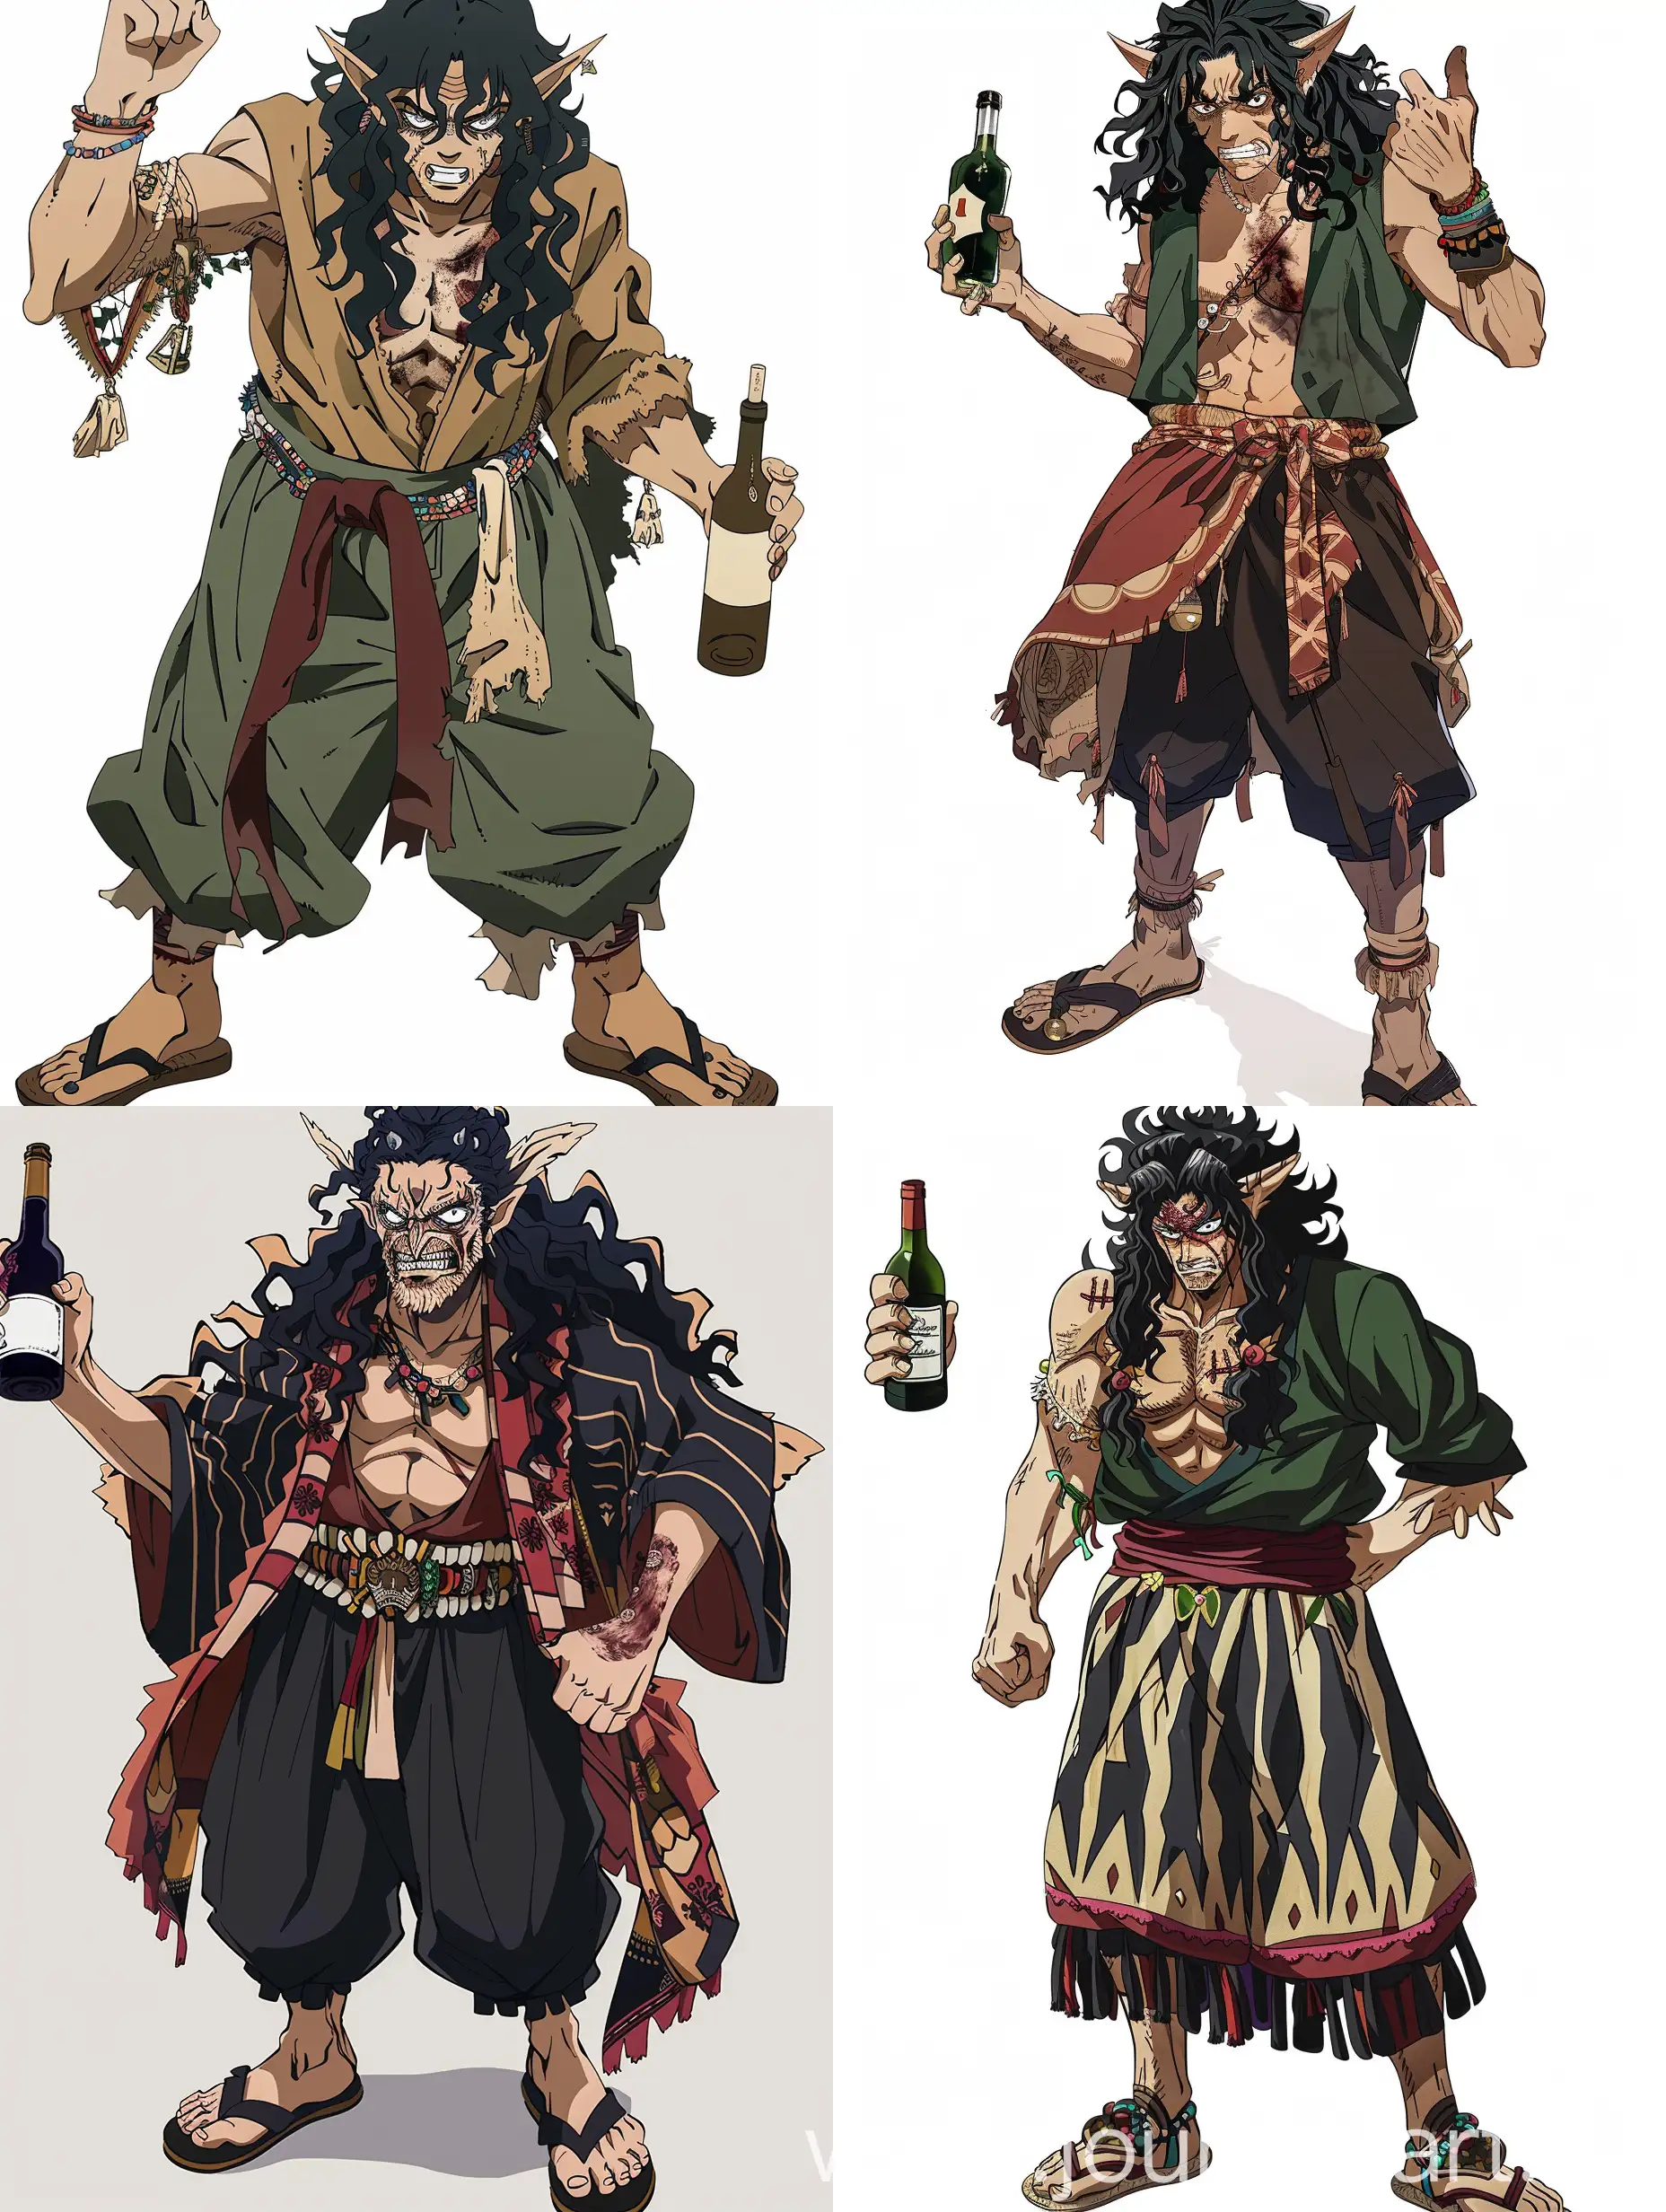 an adult man, anime style, broad shoulders, a scar on his face, white eyes, black wavy hair, angry, long ears, in a gypsy costume, wearing sandals, cool guy, holding a bottle of wine, full height, multiple times